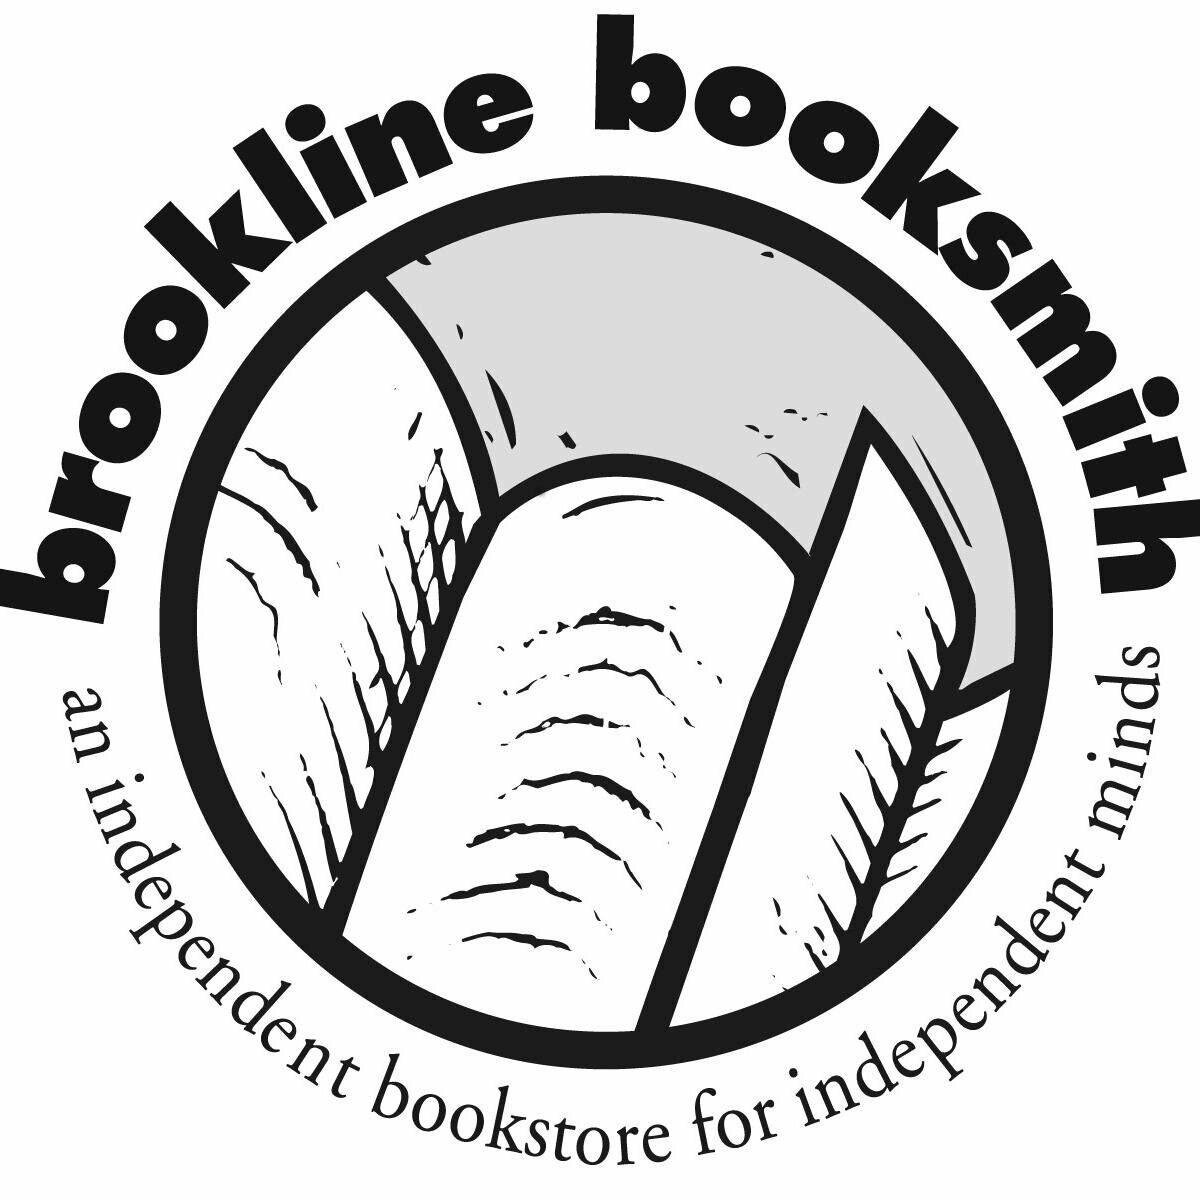 black and white book illustration with brookline booksmith text